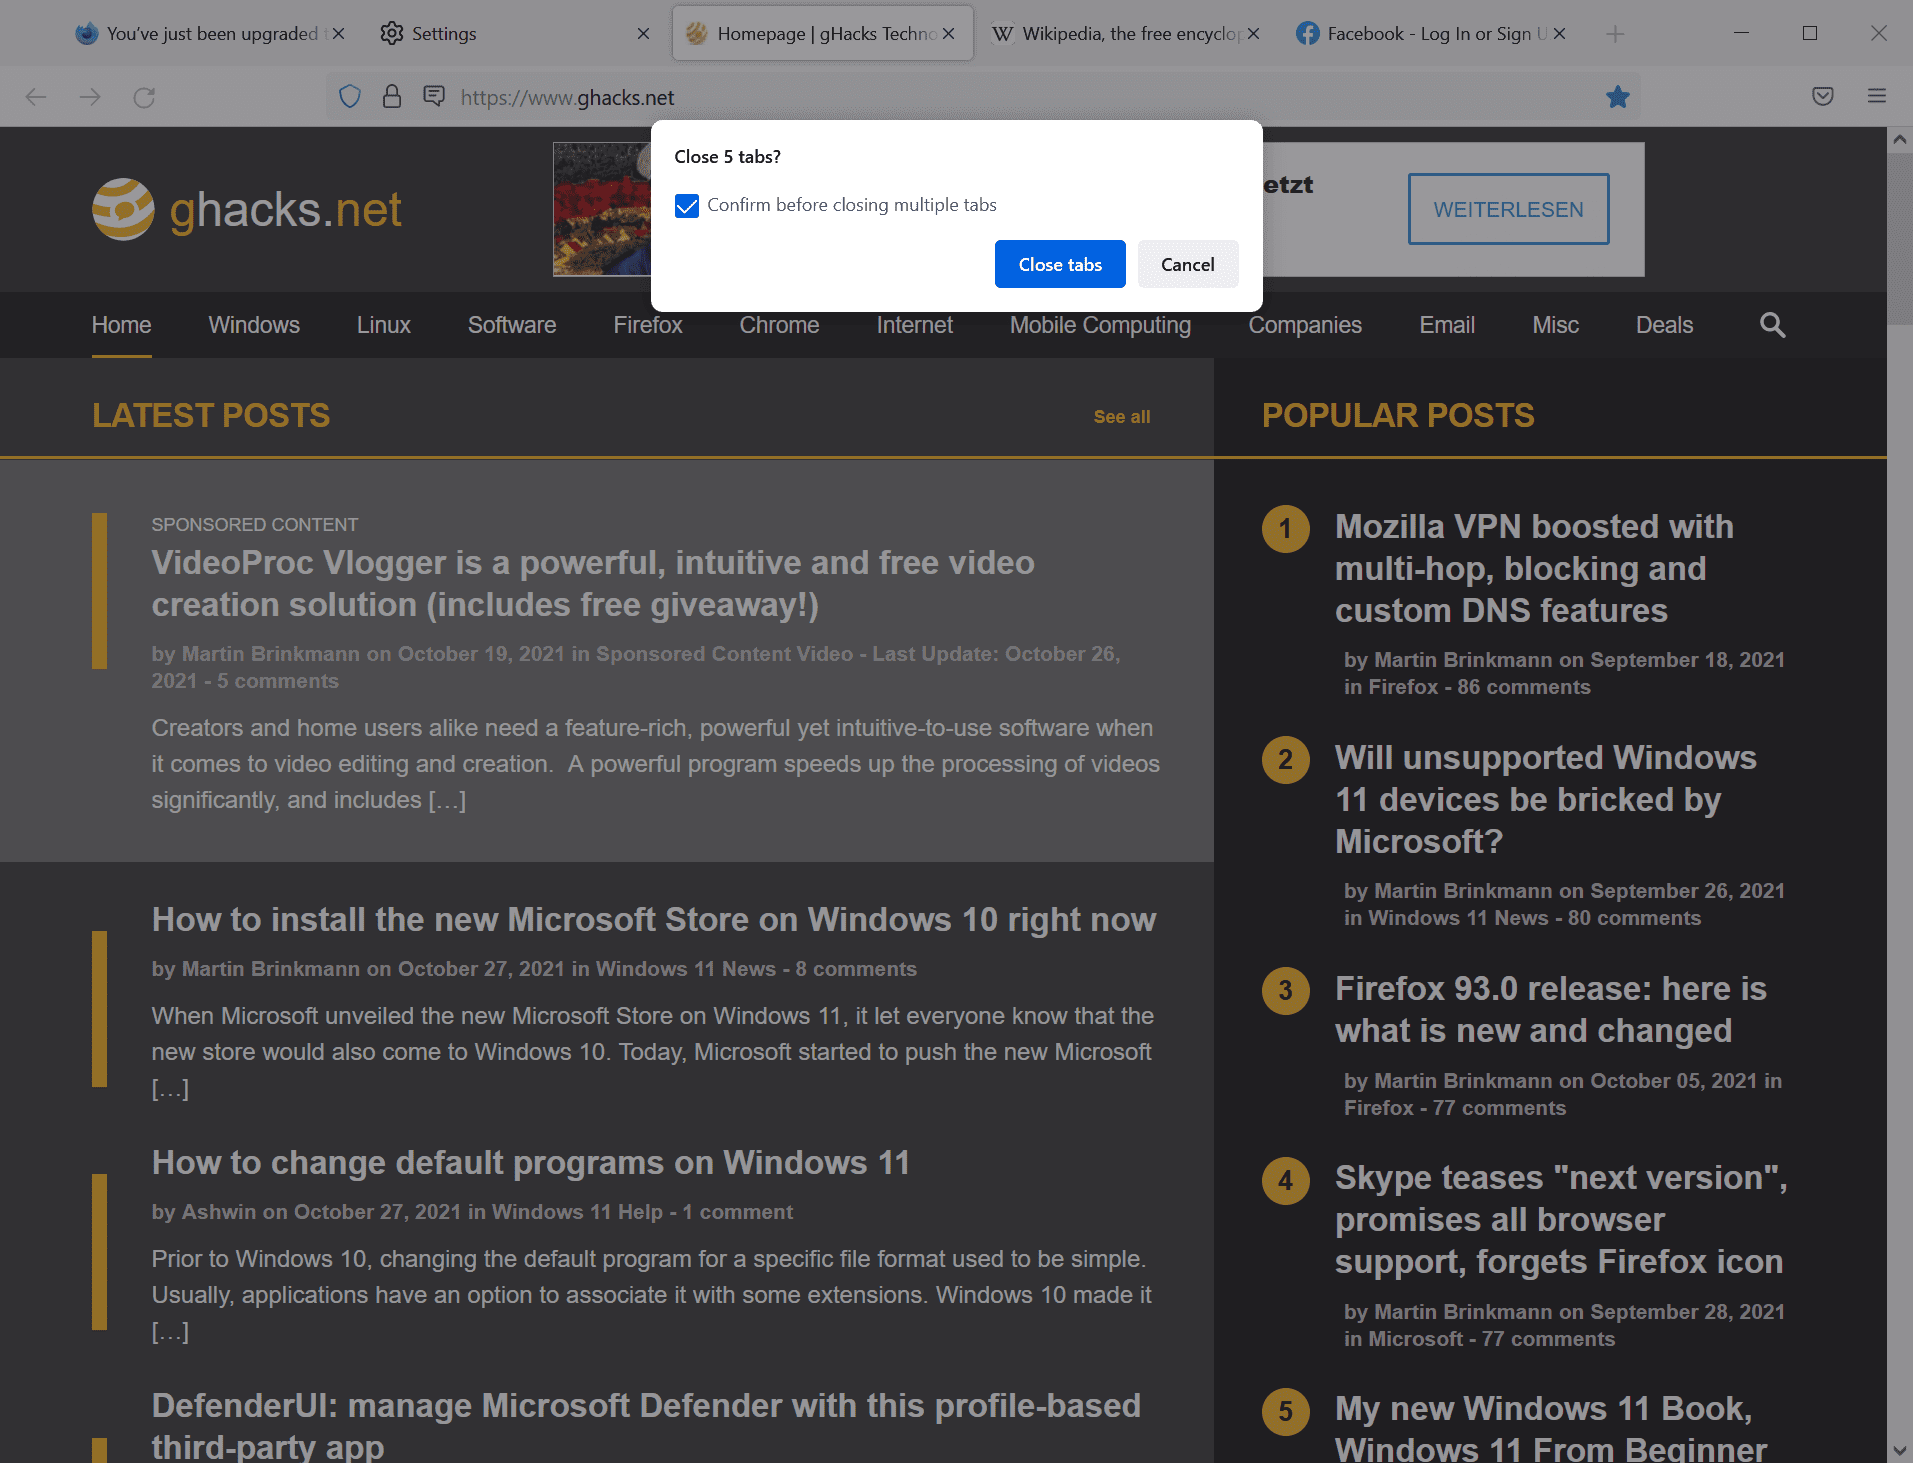 Firefox won't prompt anymore when you are closing multiple tabs, but there is an option to enable it